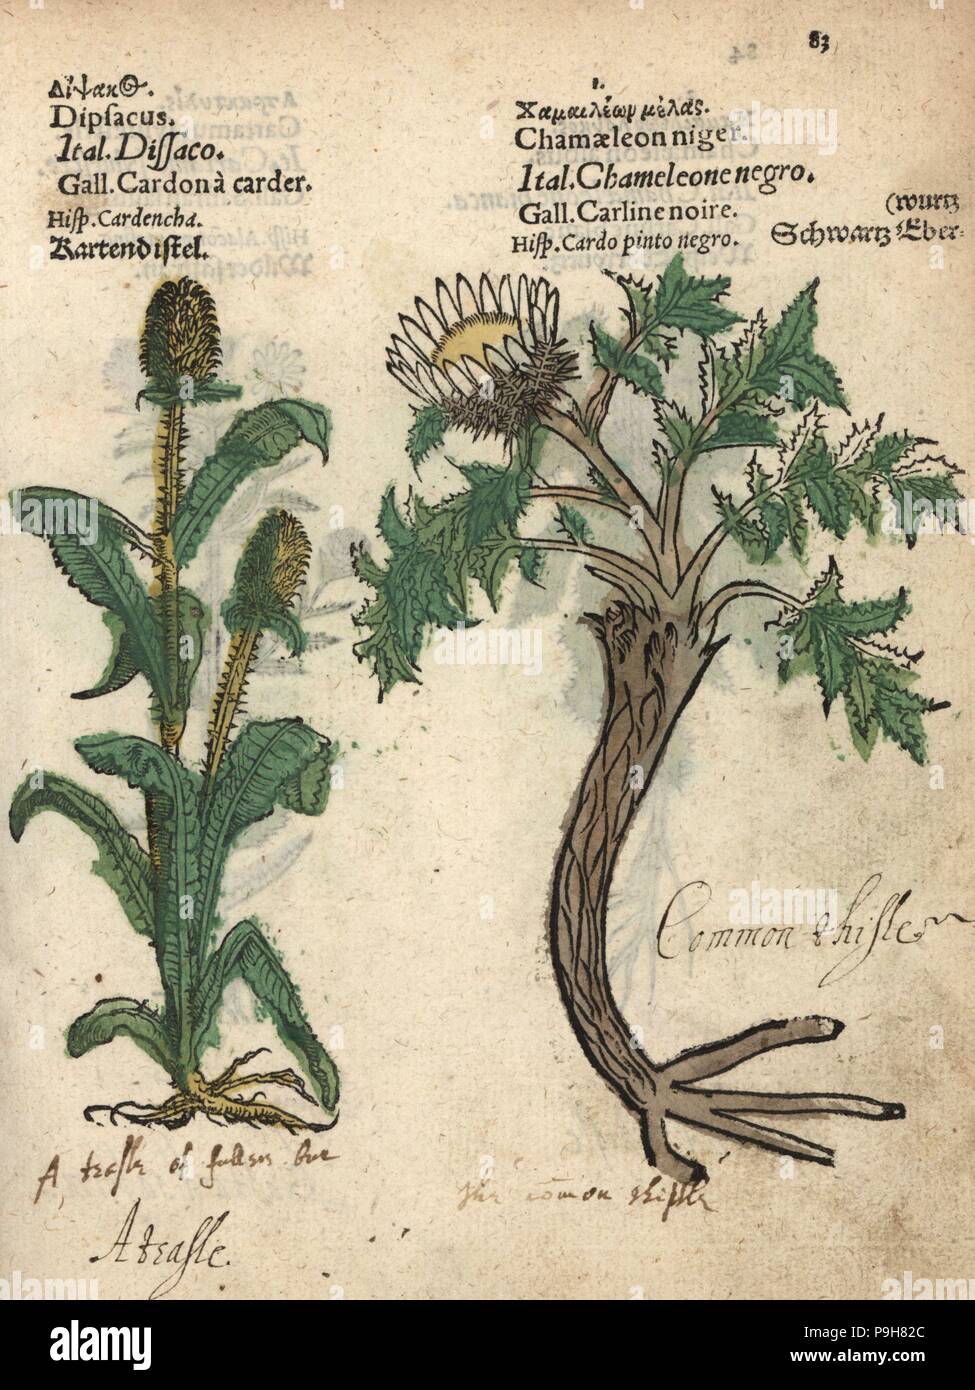 Teasel, Dipsacus fullonum, and pale globe thistle, Echinops sphaerocephalus. Handcoloured woodblock engraving of a botanical illustration from Adam Lonicer's Krauterbuch, or Herbal, Frankfurt, 1557. This from a 17th century pirate edition or atlas of illustrations only, with captions in Latin, Greek, French, Italian, German, and in English manuscript. Stock Photo